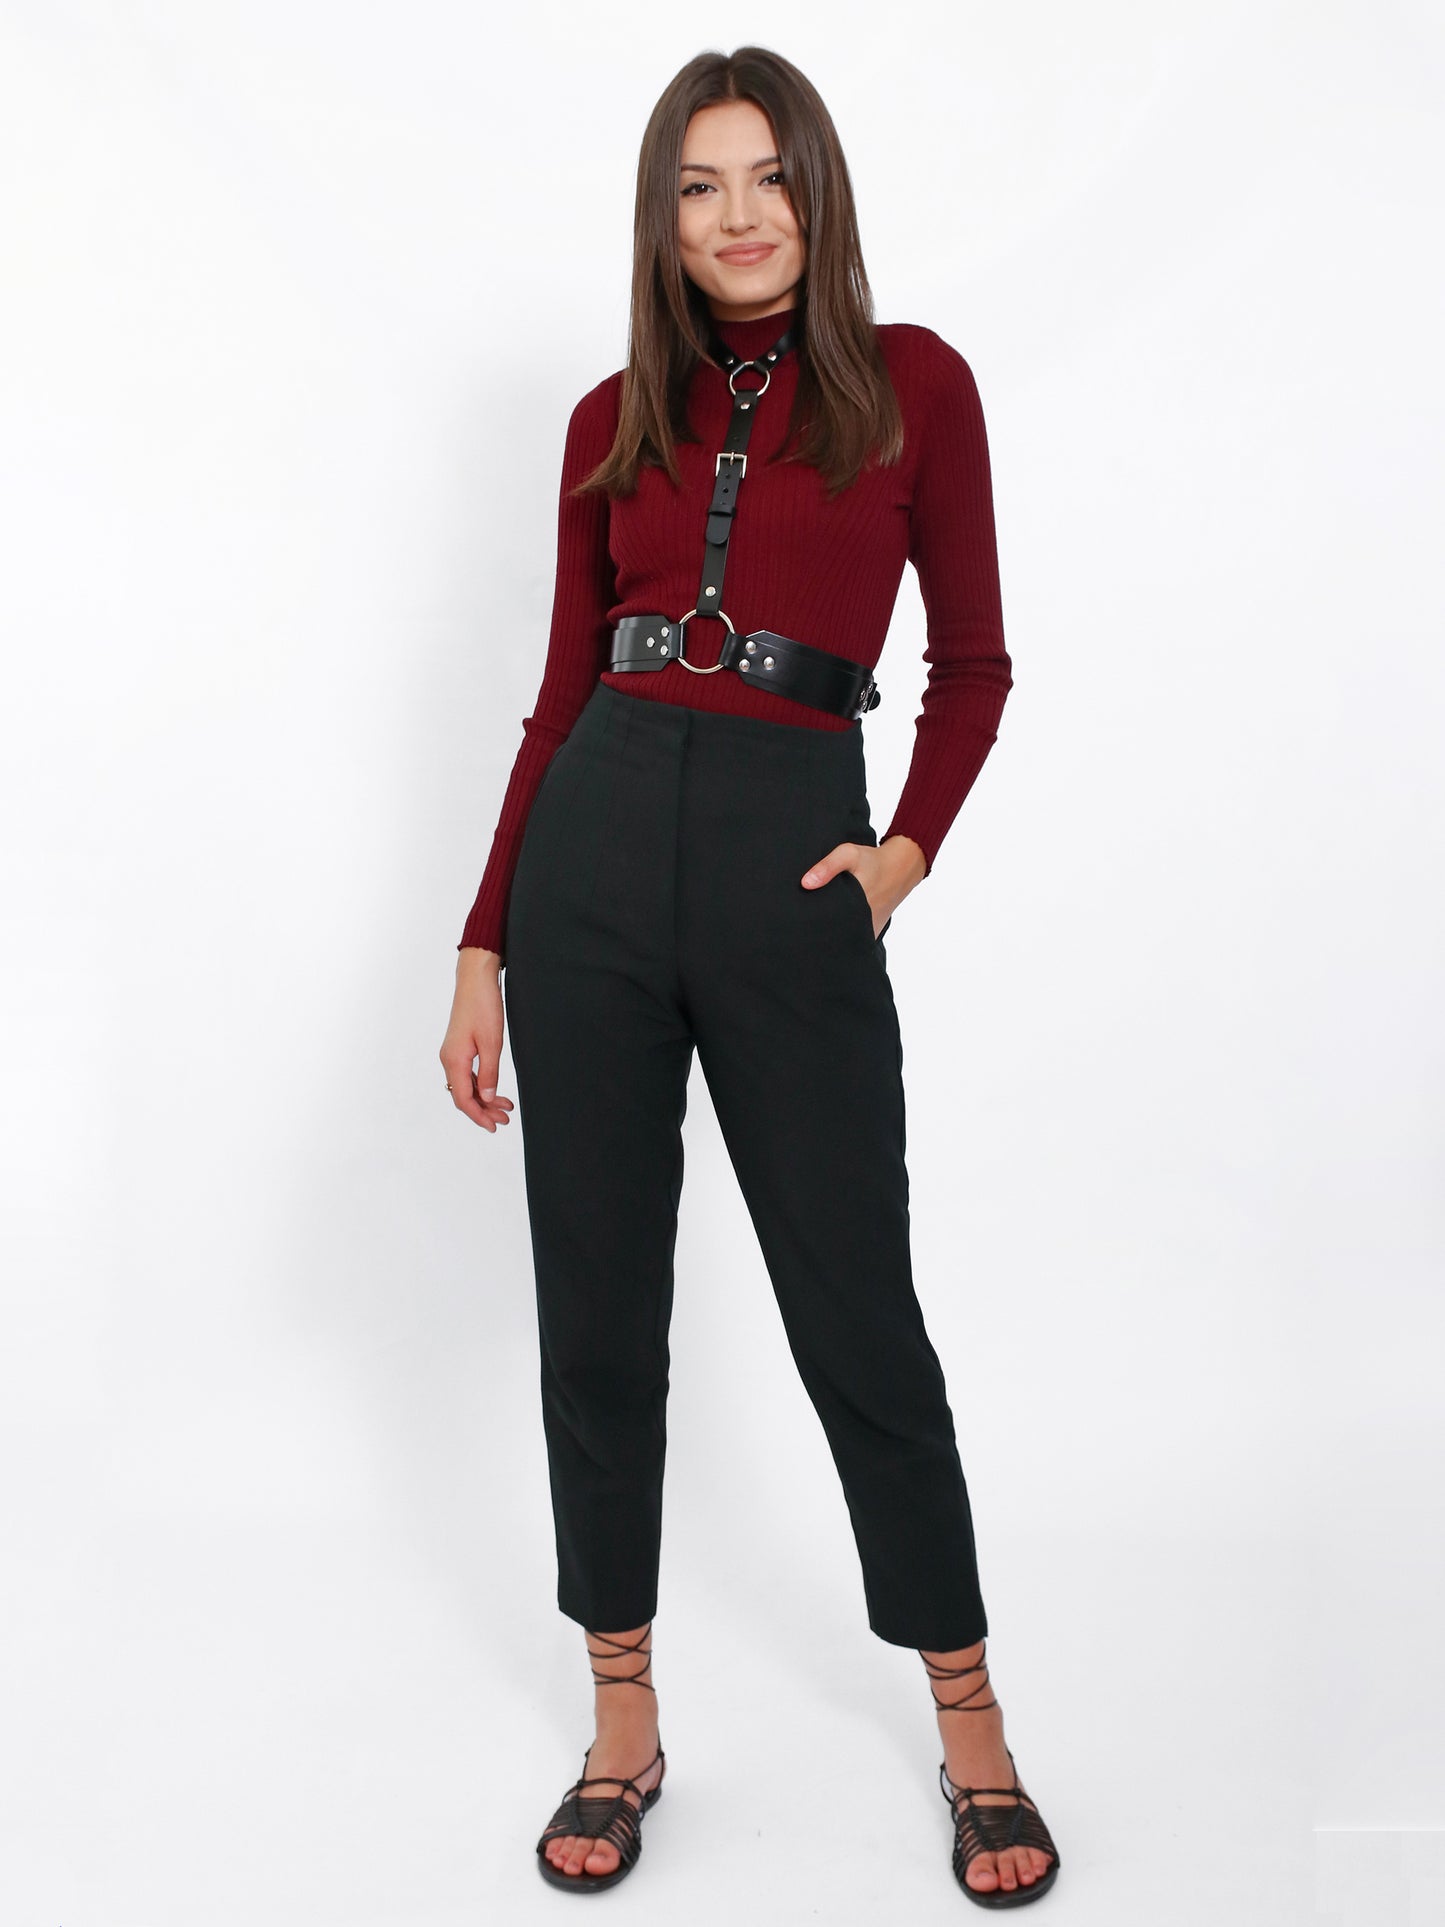 Complet look with leather harness, black pants and burgundy blouse